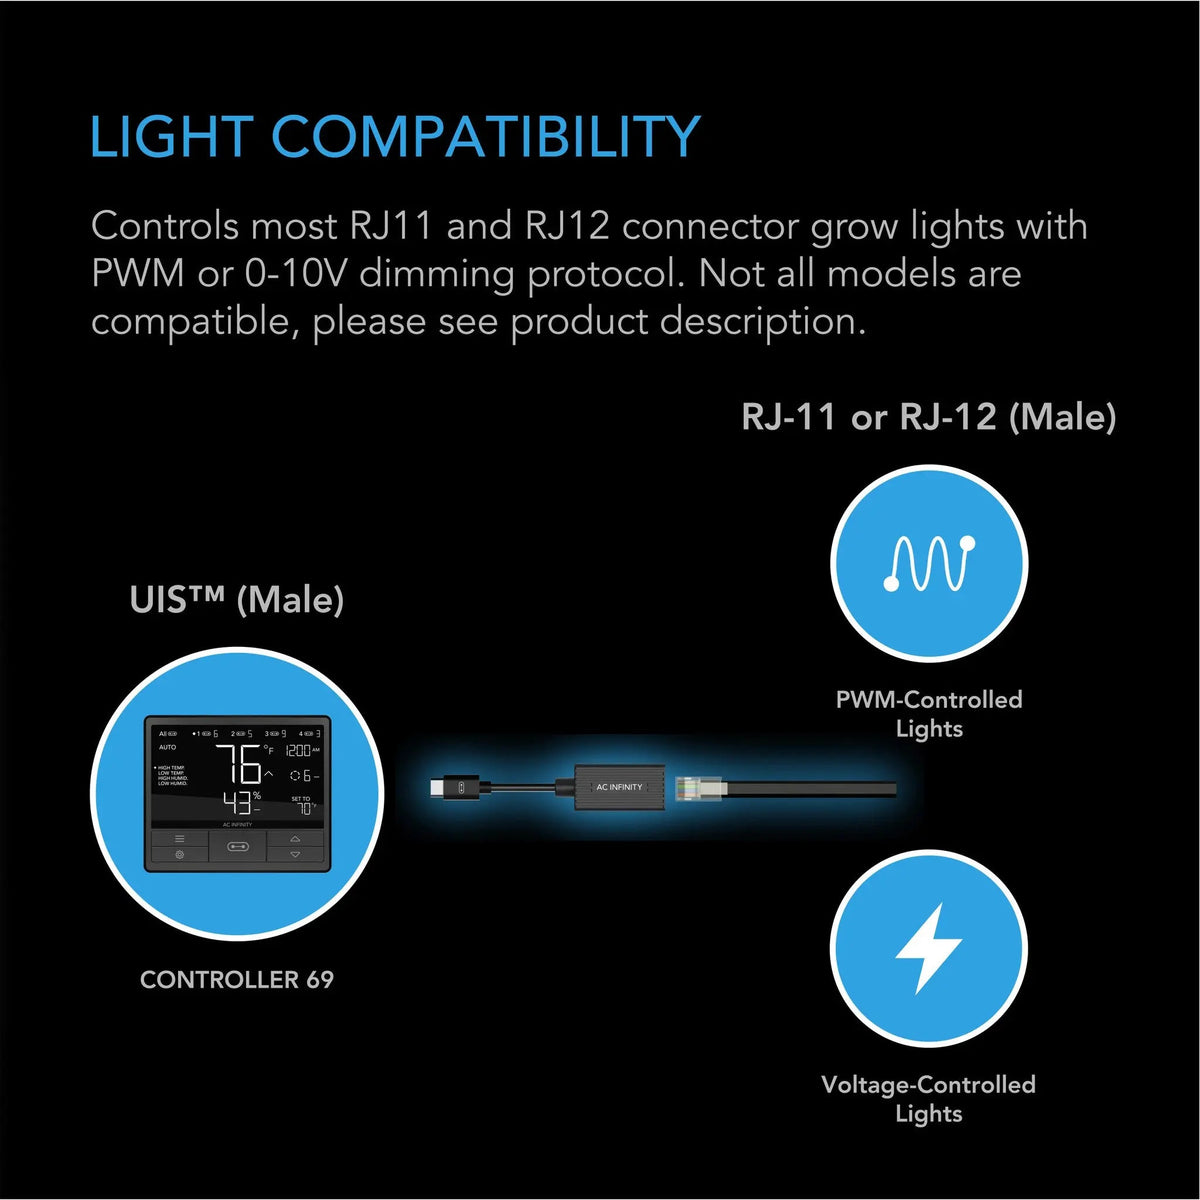 AC Infinity UIS Lighting Adapter Type-A, For RJ11/12 Connector Lights With PWM or 0-10V Dimmers